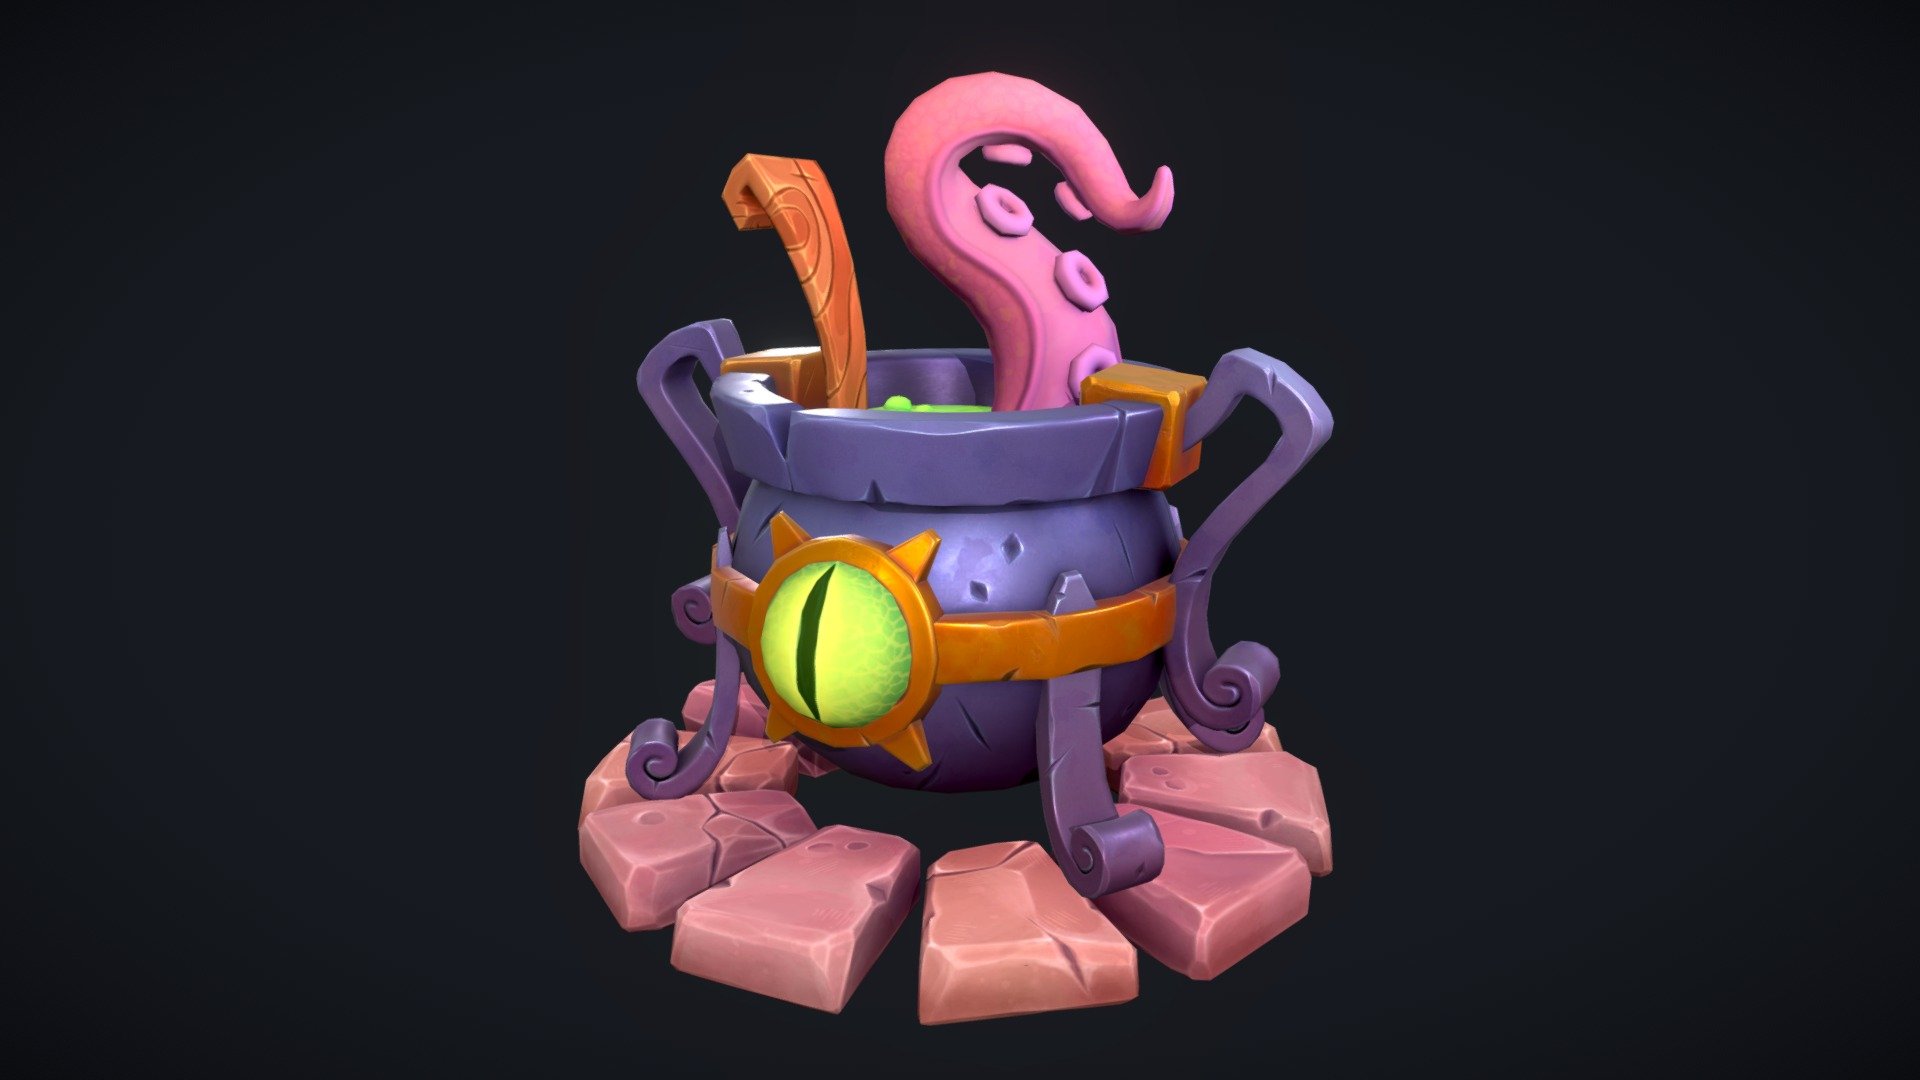 Introducing my latest creation: a magic and bewitching cauldron! Hope you like it!
Software used: Blender, Zbrush, Marmoset Toolbag, Substance 3D Painter;
Concept by Oscar Ibanez: https://www.artstation.com/artwork/6bWDZN;
My artstation: https://www.artstation.com/jammynoctua - Magic Cauldron - 3D model by jammynoctua 3d model